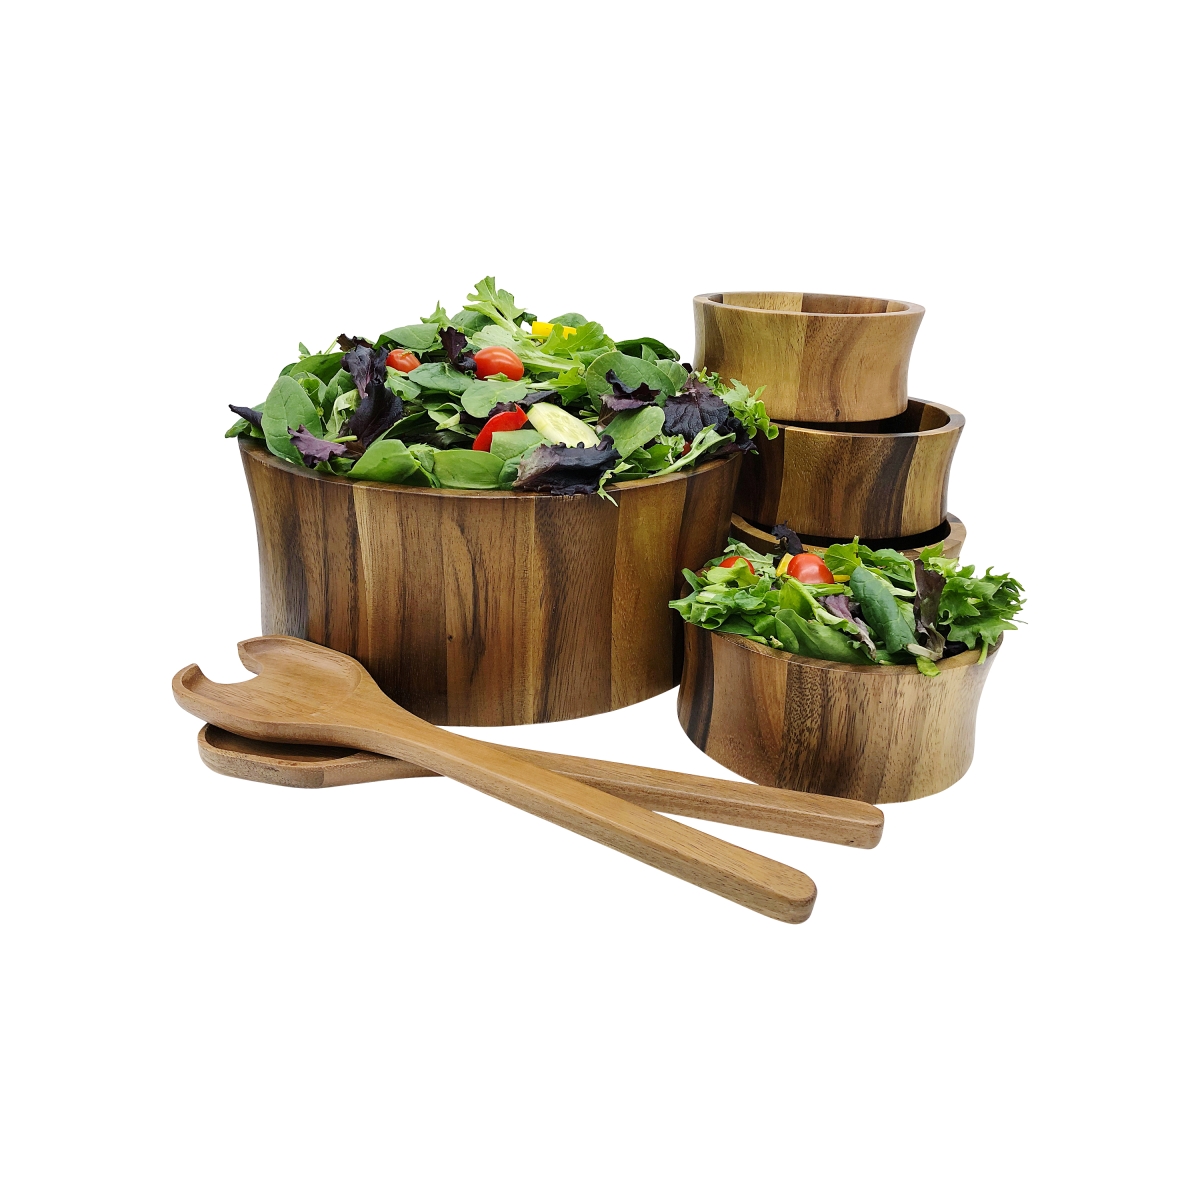 328c-7 Extra Large Salad Bowl With Servers & Individuals Bowls - 7 Piece